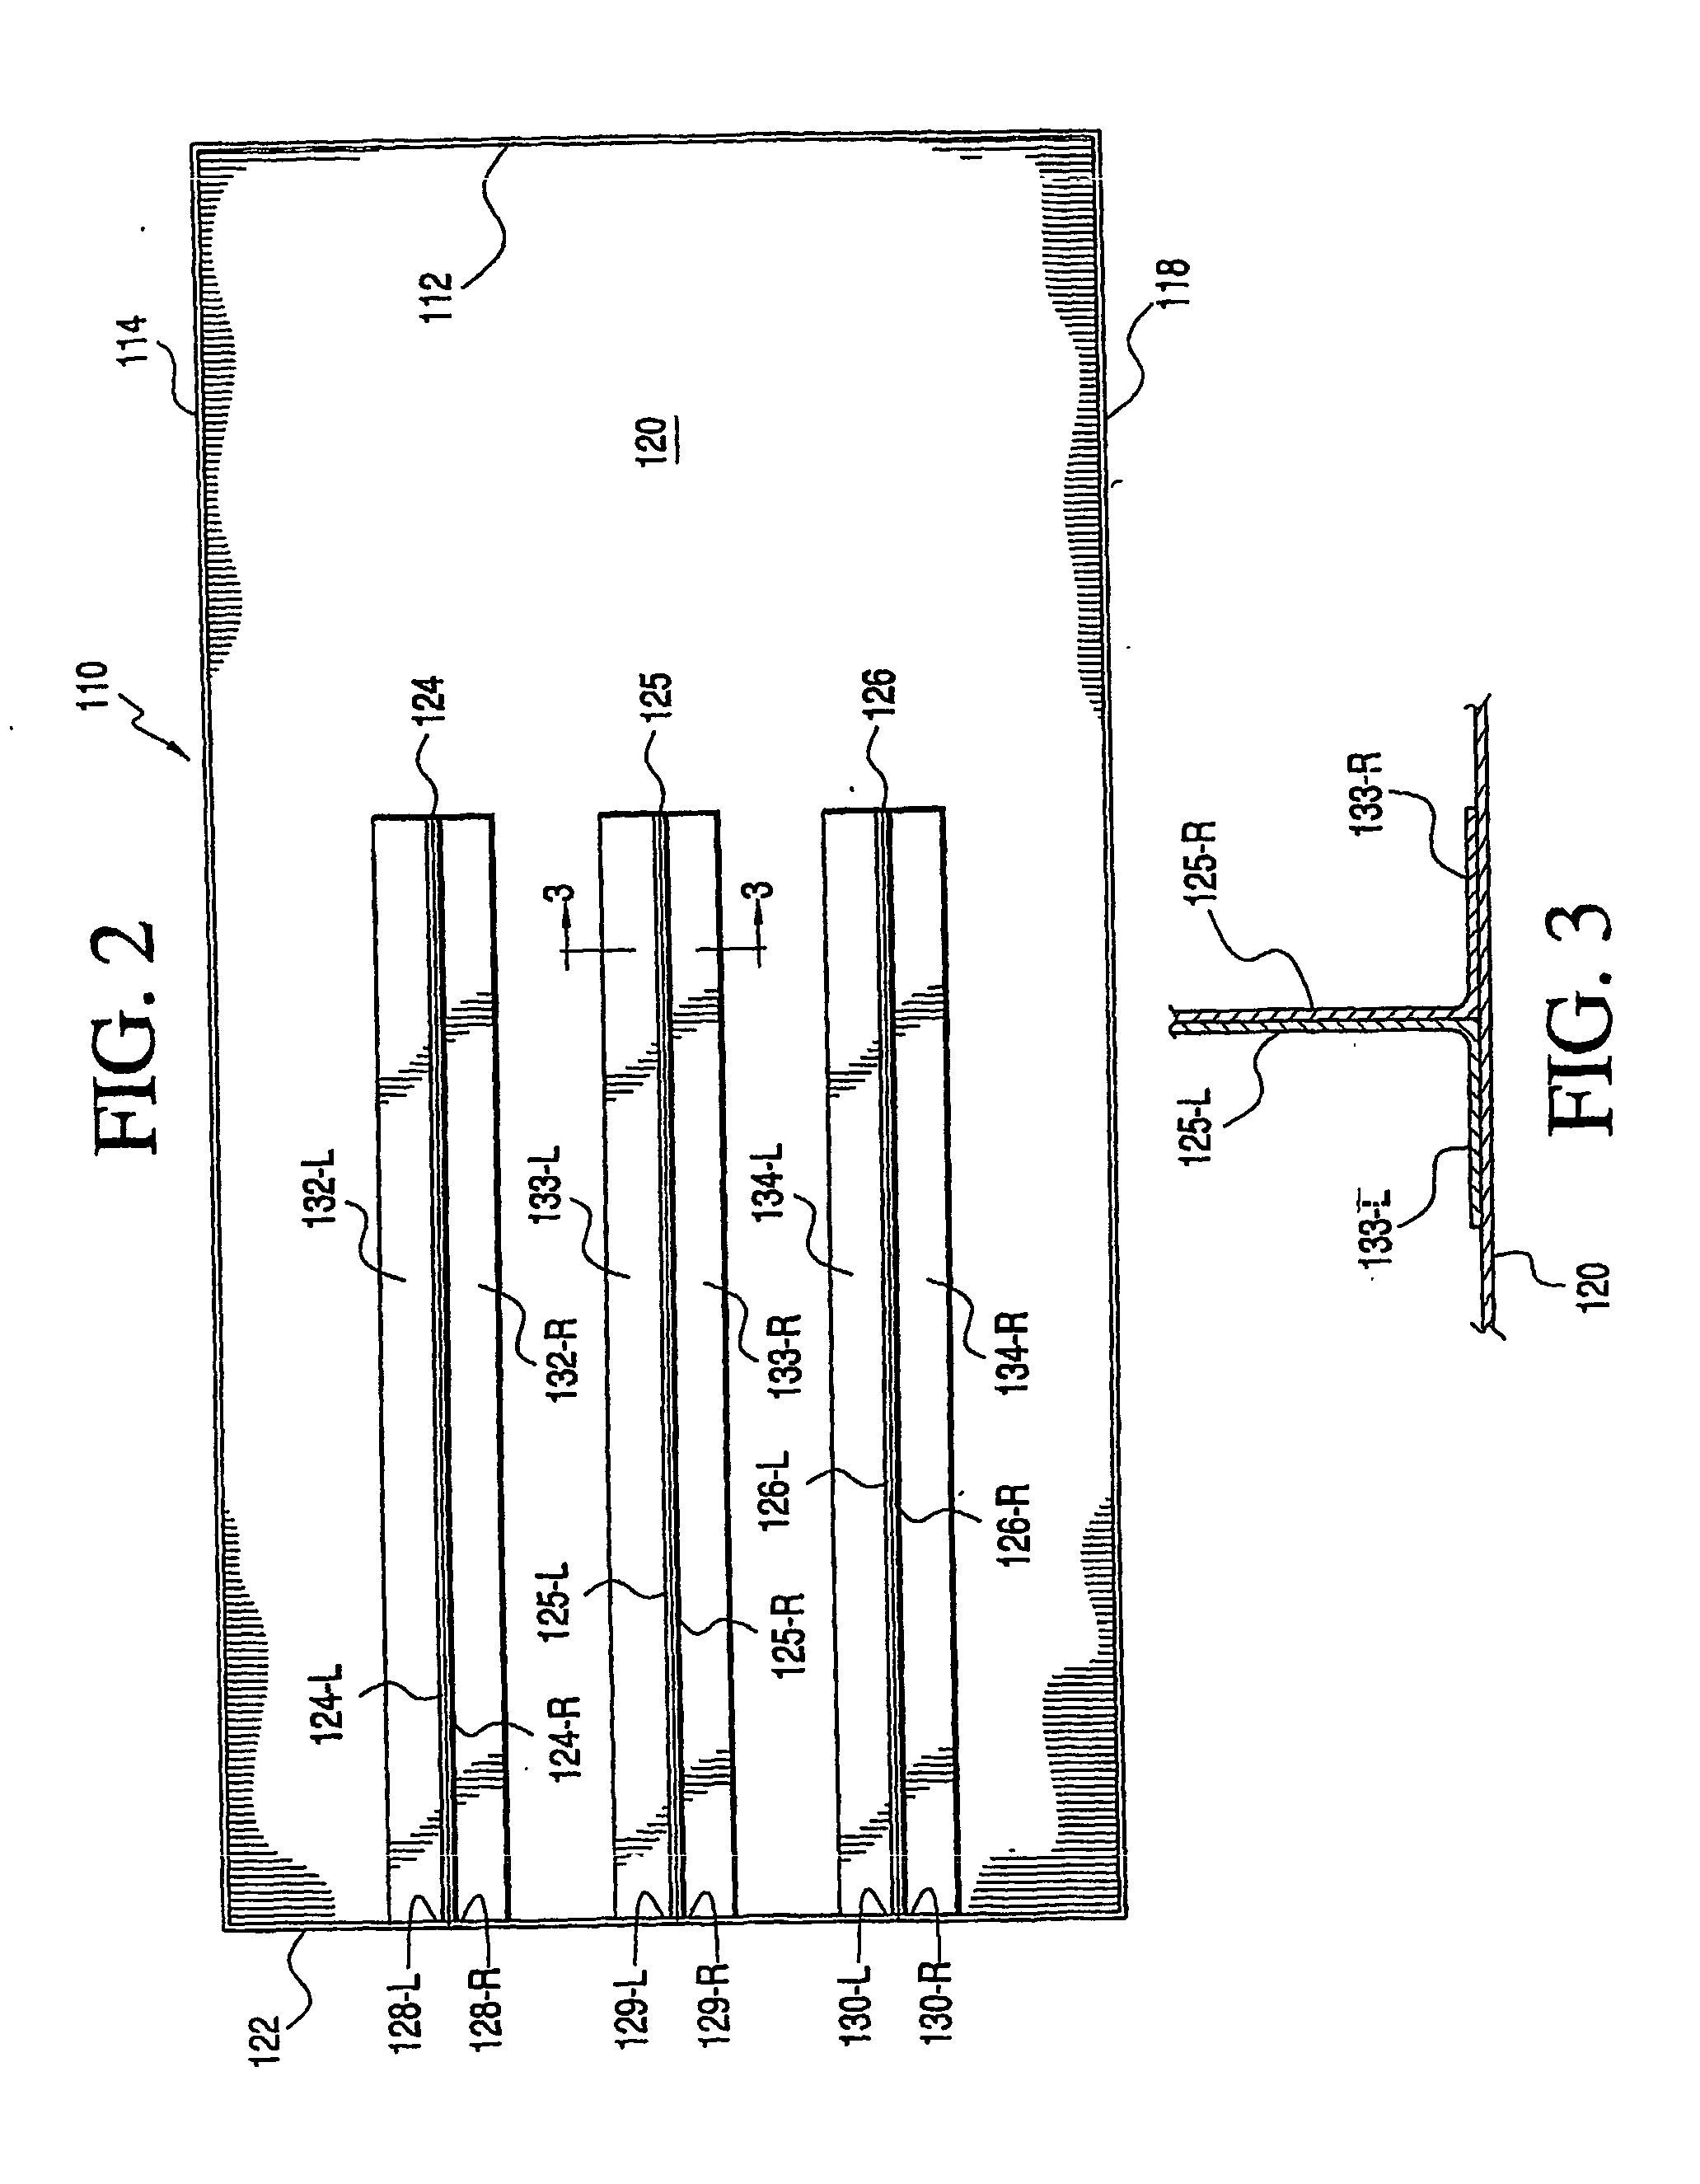 Bulk material cargo container liner with internal restraint system for preventing the outward bulging of the liner